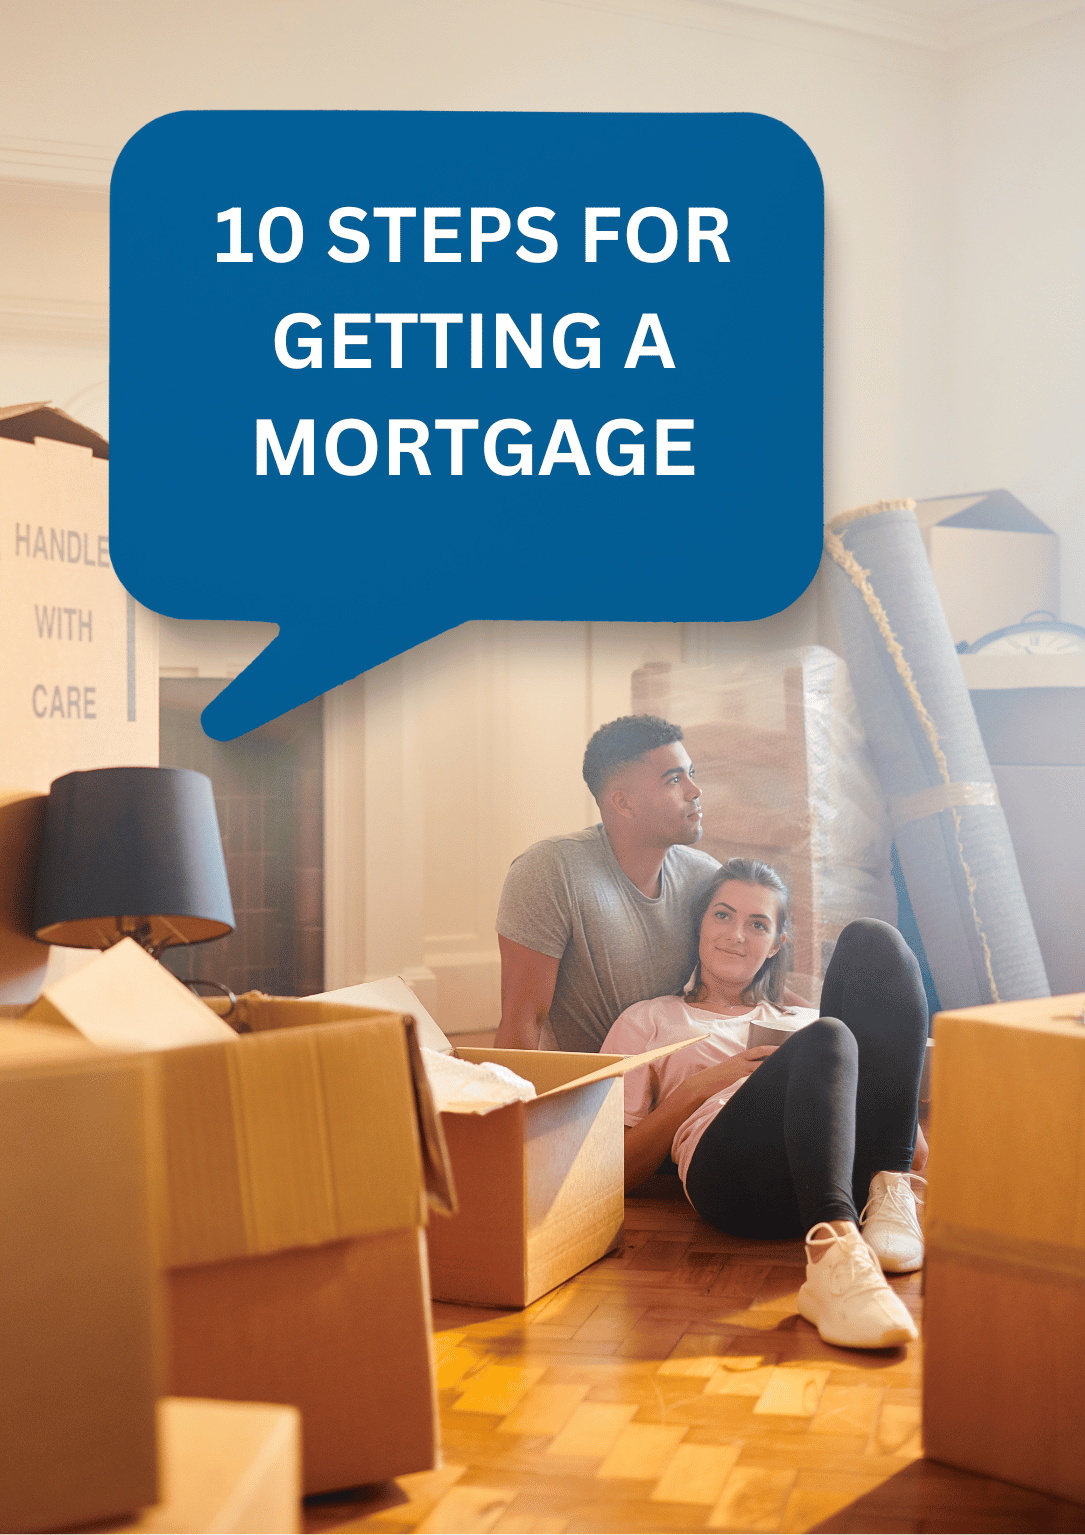 10 steps for getting a mortgage